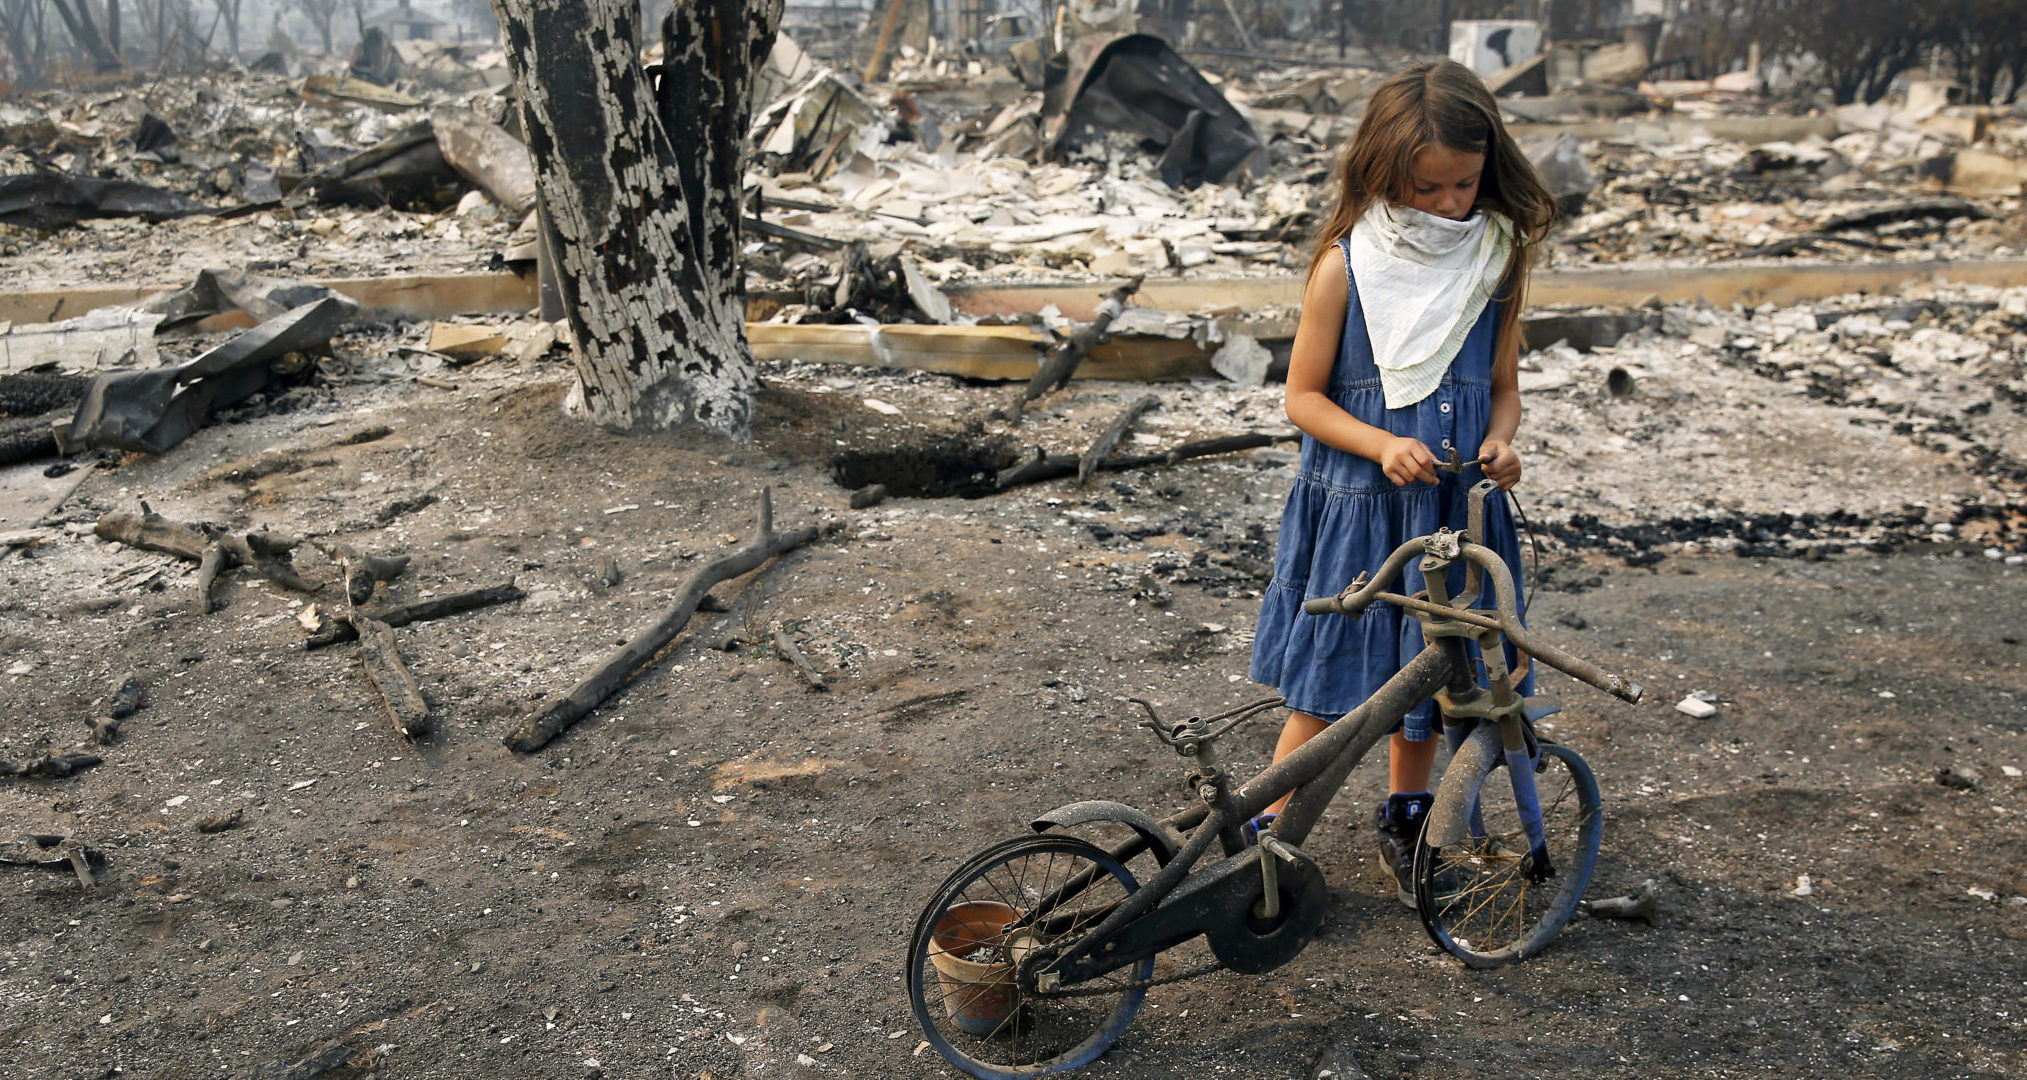 Photo of girl with her bike destroyed in Santa Rosa wildfire touches hearts